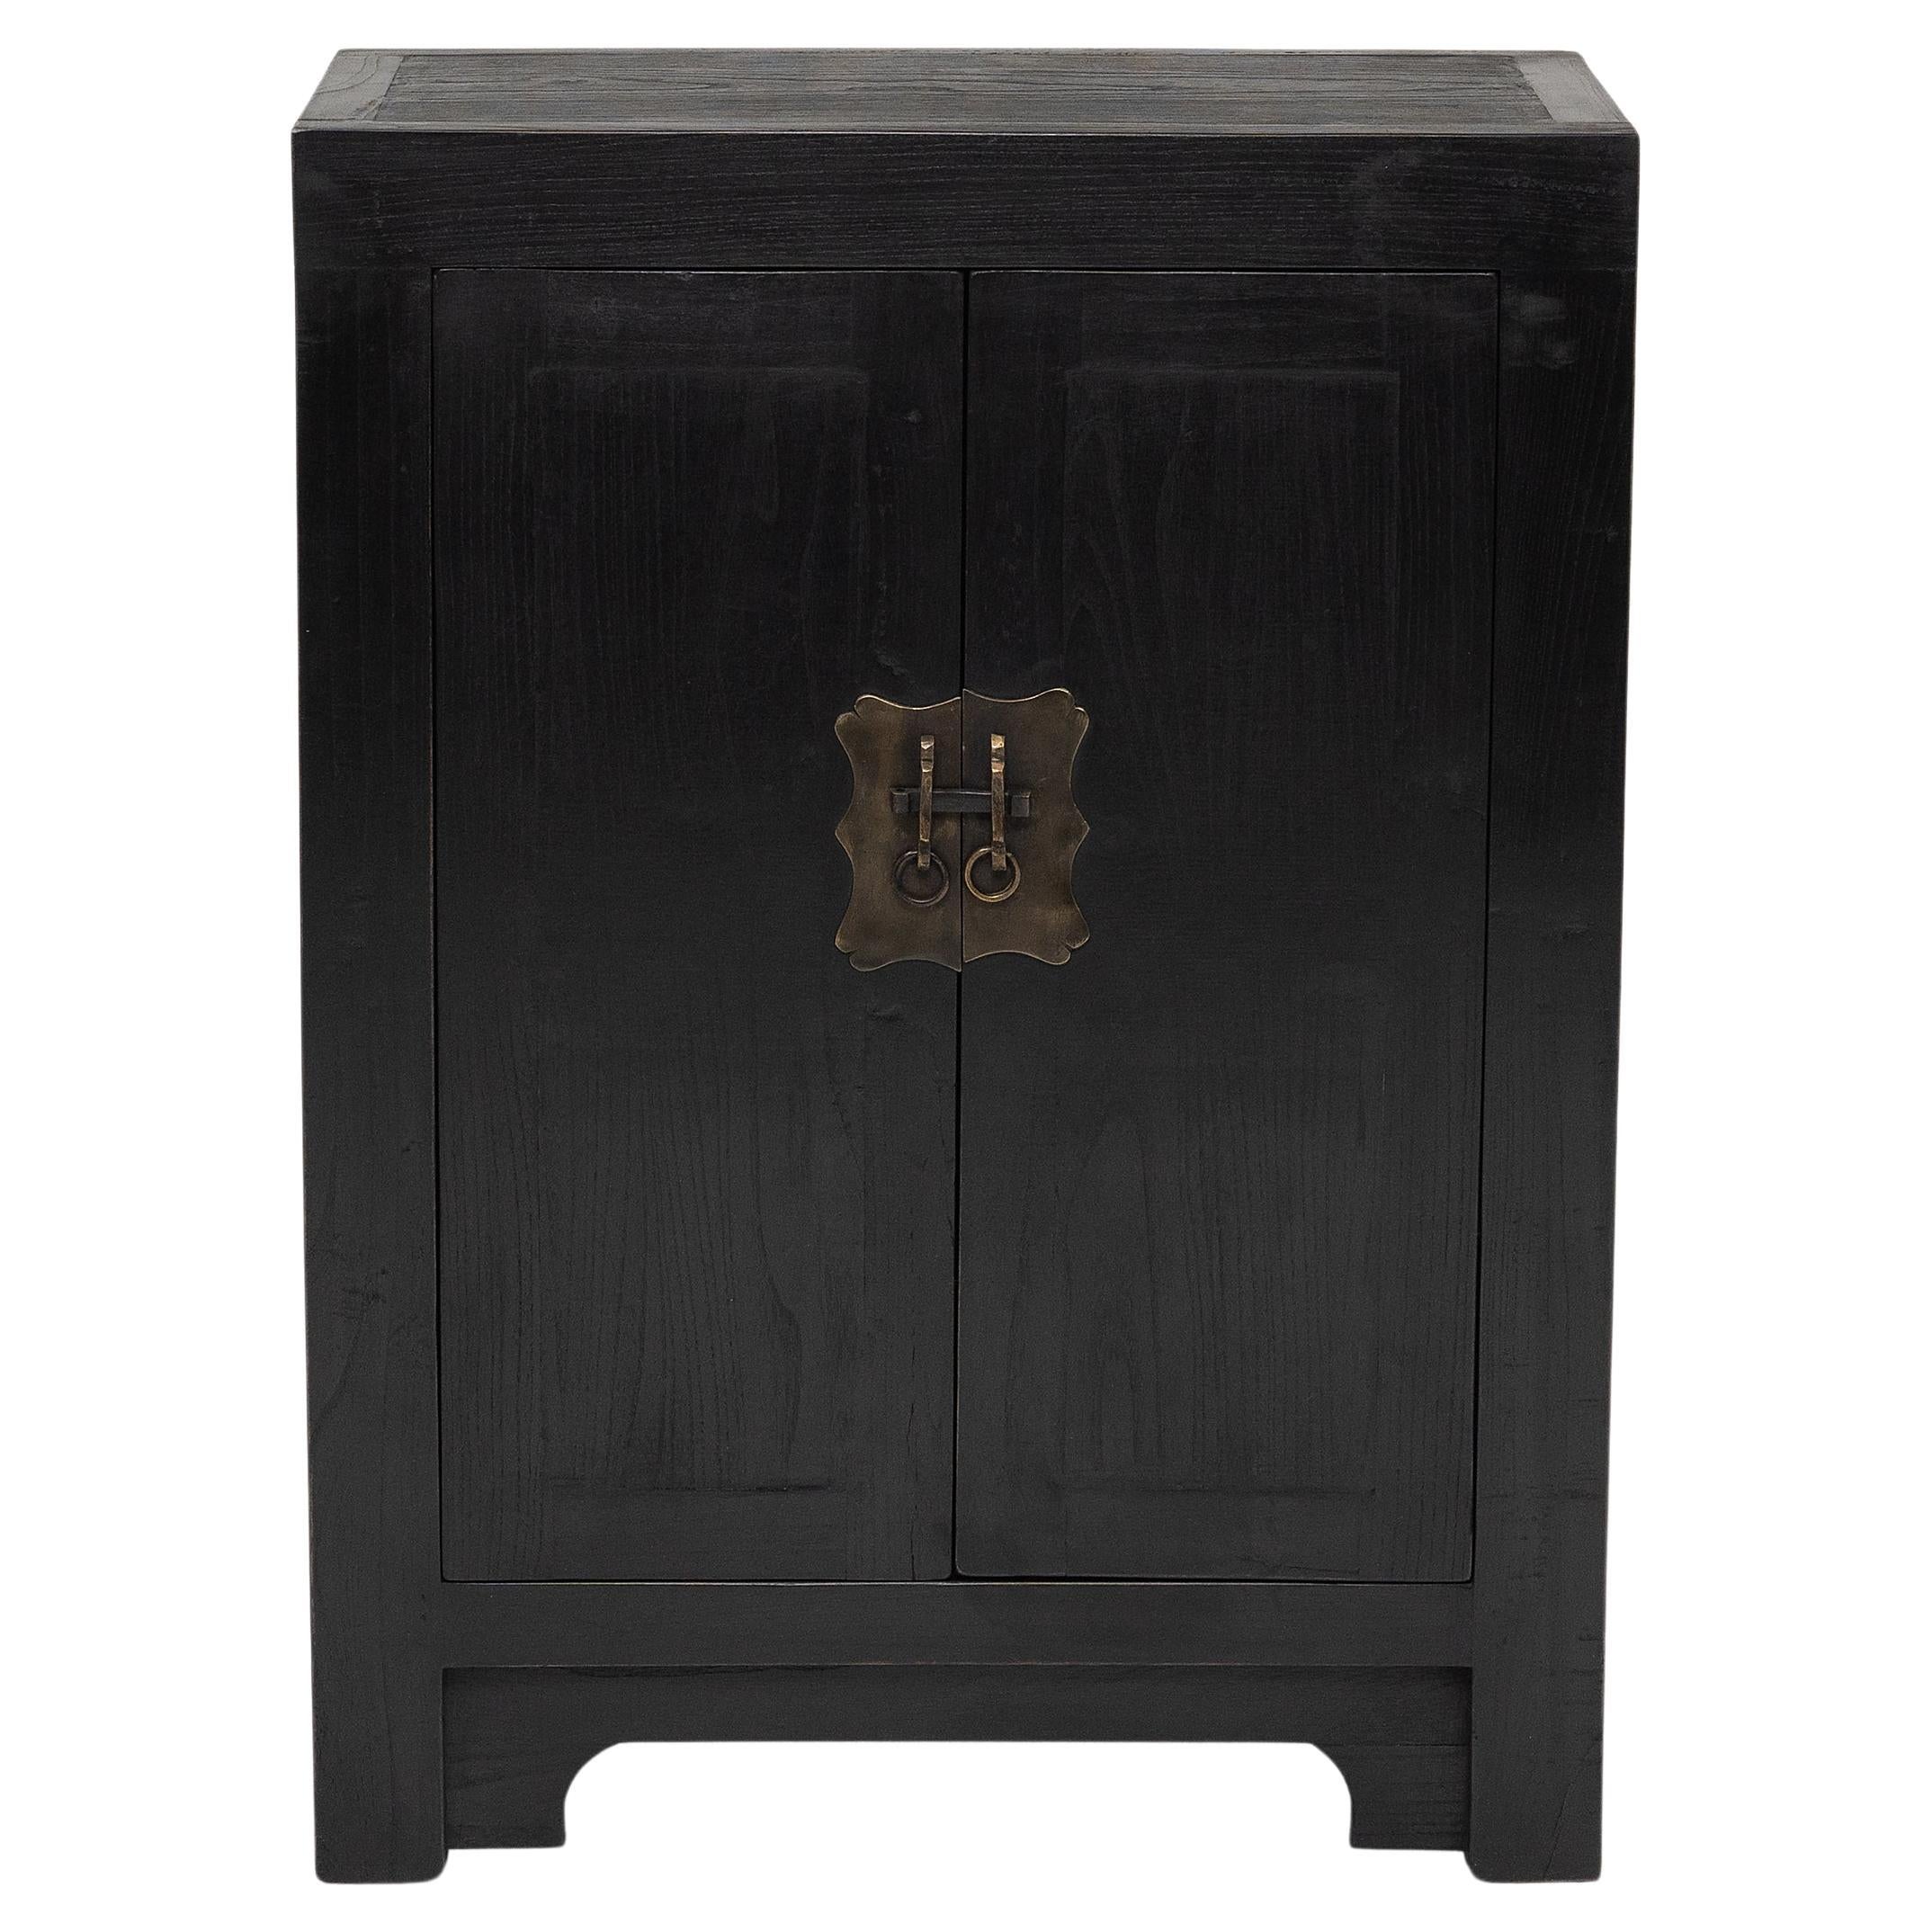 Chinese Square Corner Locking Cabinet For Sale